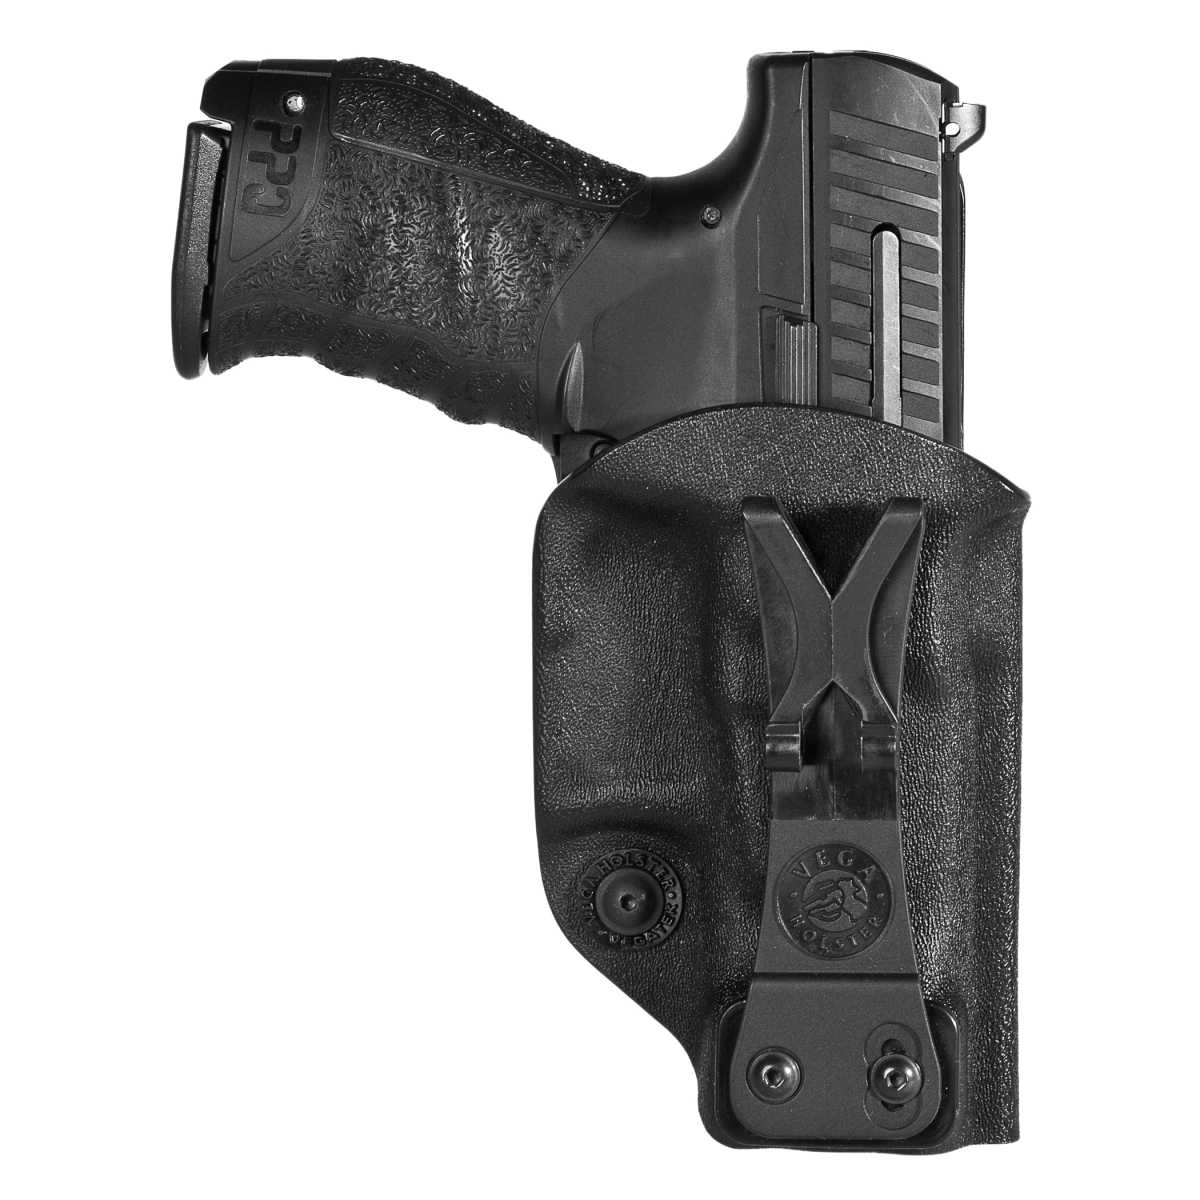 Inside Polymer Holster with Clip Glock 17/22